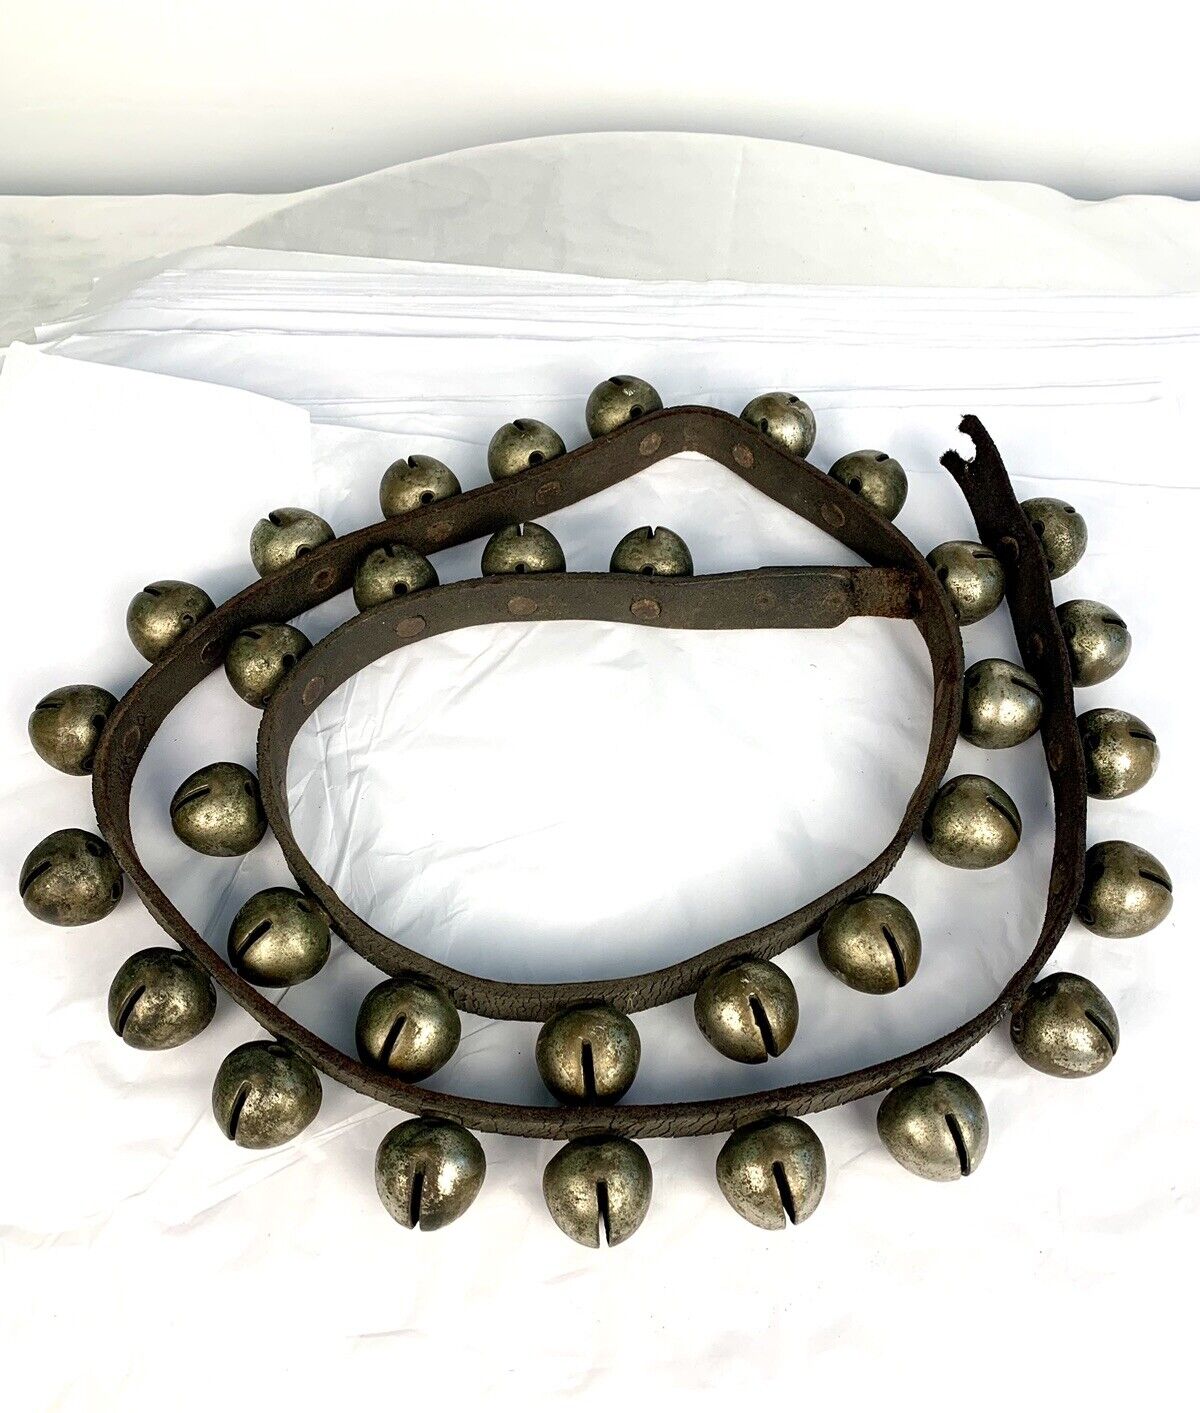 Antique Sleigh Bells with 33 Metal Bells Leather Strap 60” Long. 🎄Holiday Bells